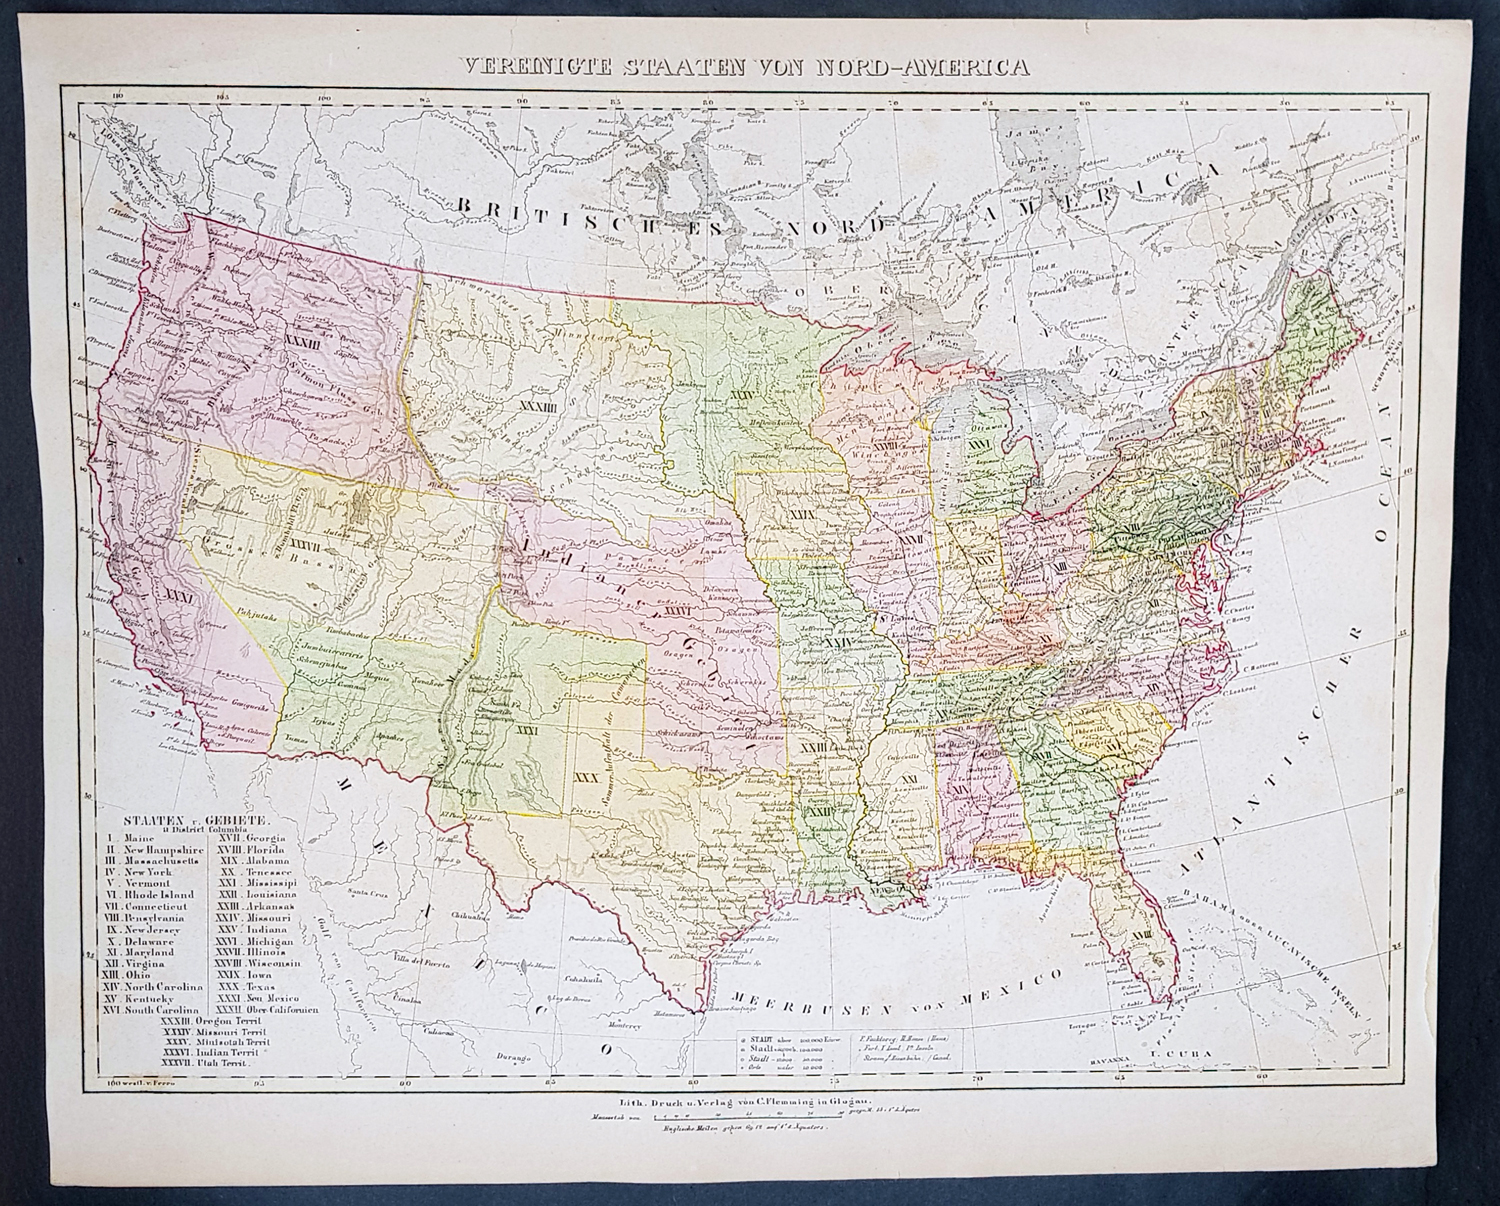 1849 Flemming Antique Map The United States of America